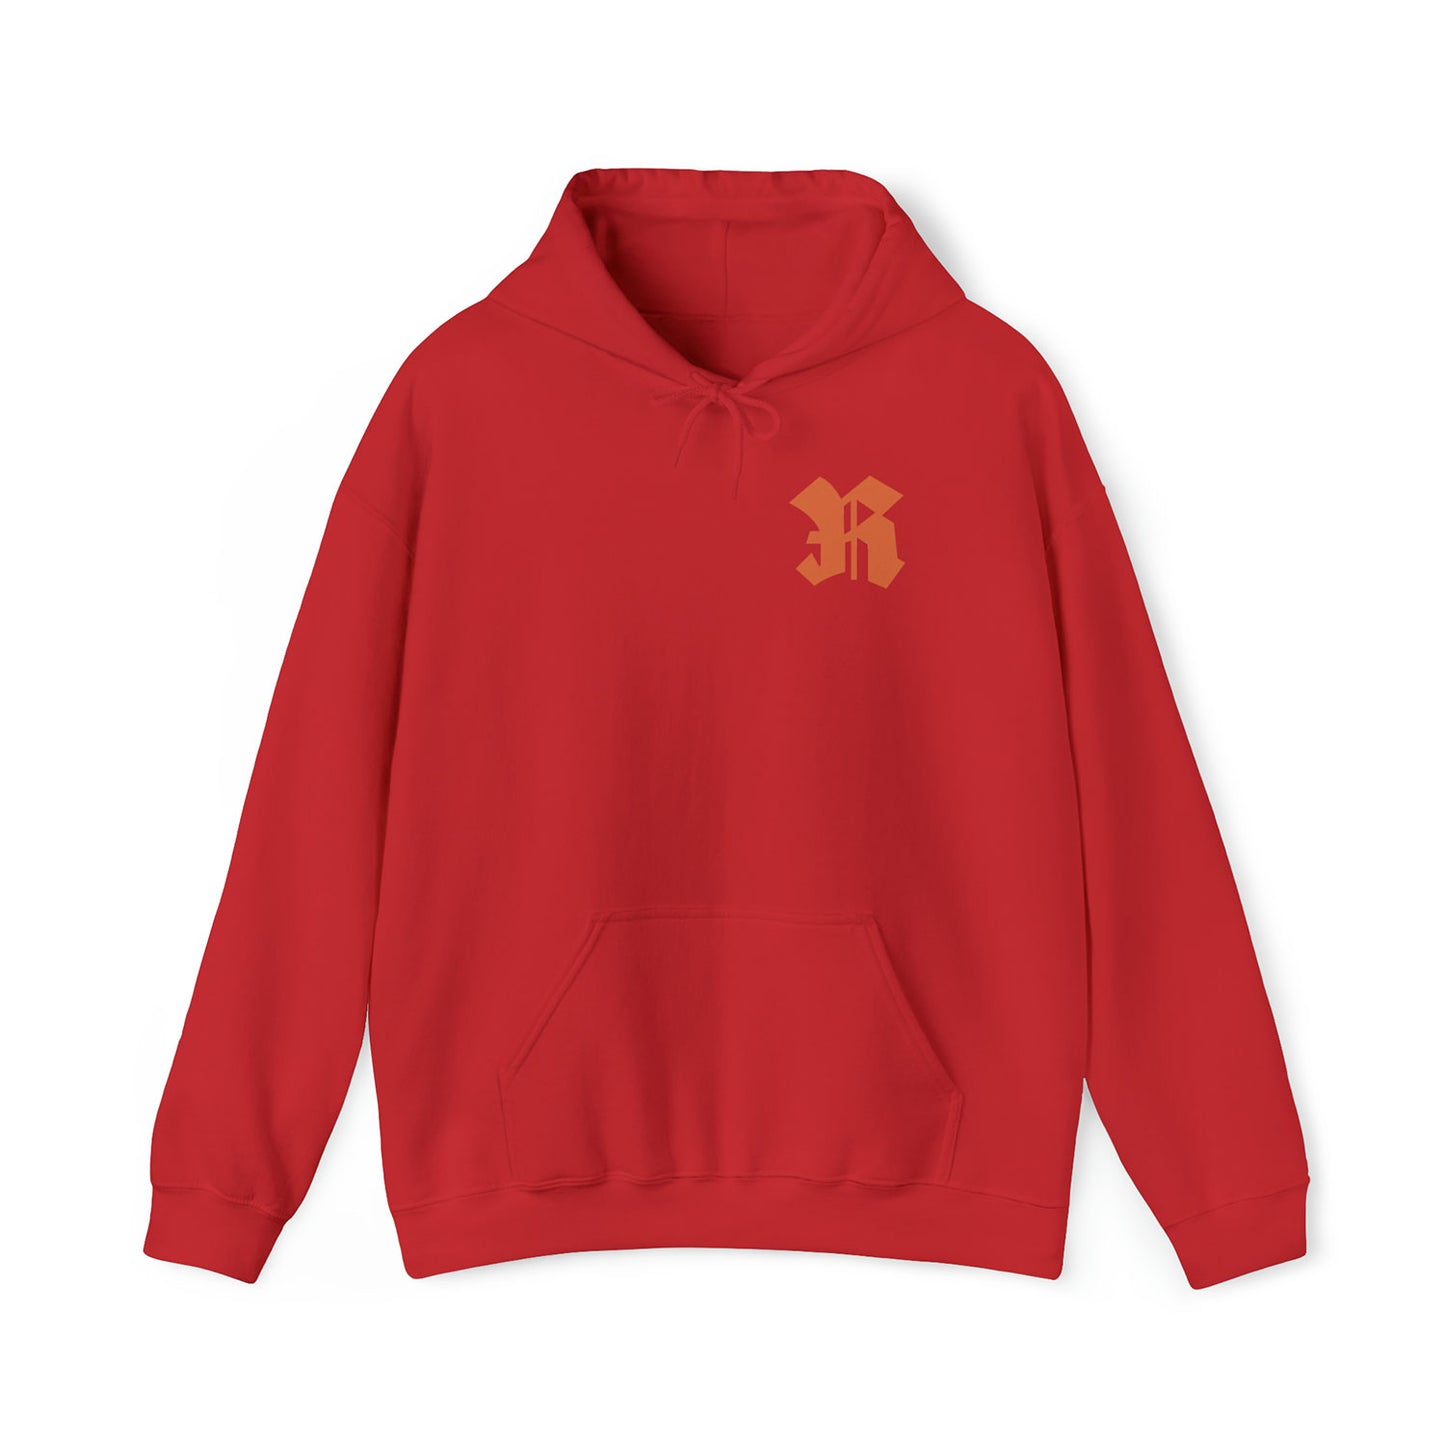 Hoodie relax WS23 Special - R - Rotterdam - logo achter groot